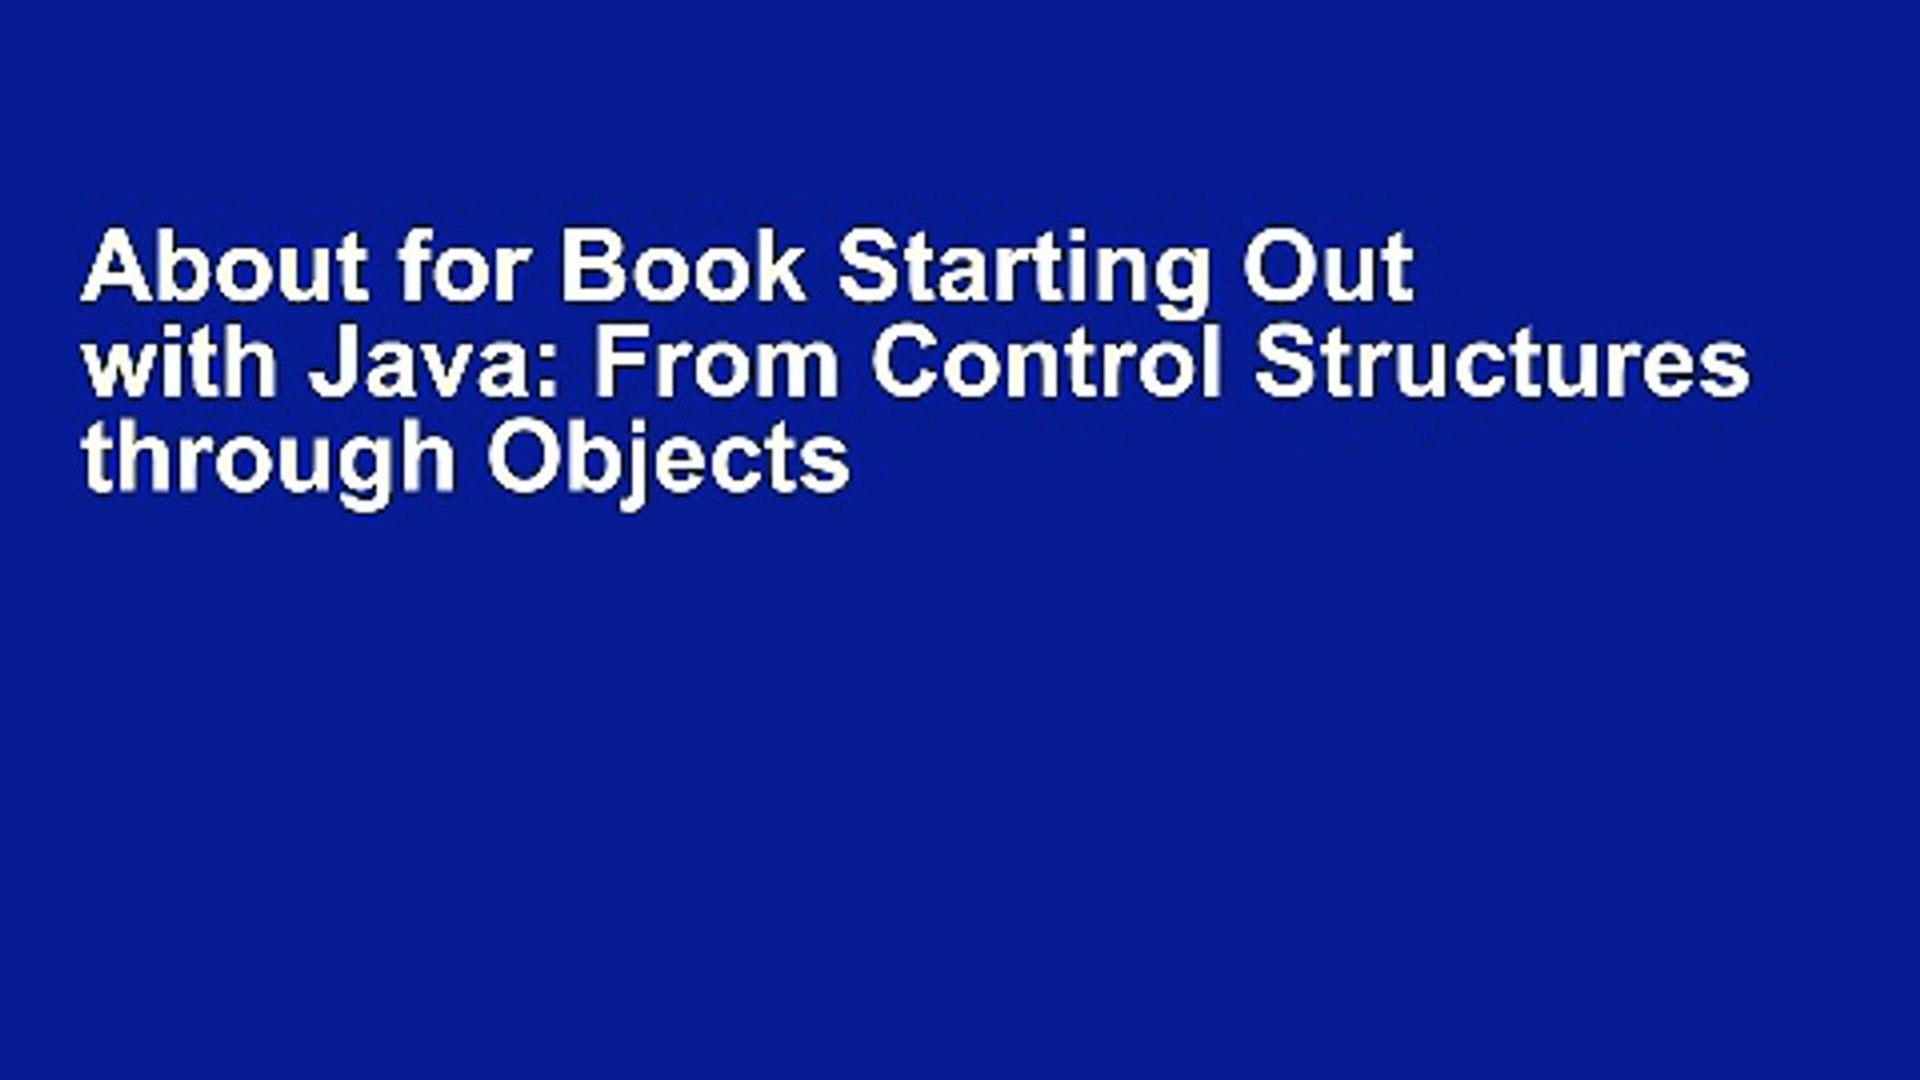 About for Book Starting Out with Java: From Control Structures through Objects [F.u.l.l Pages]